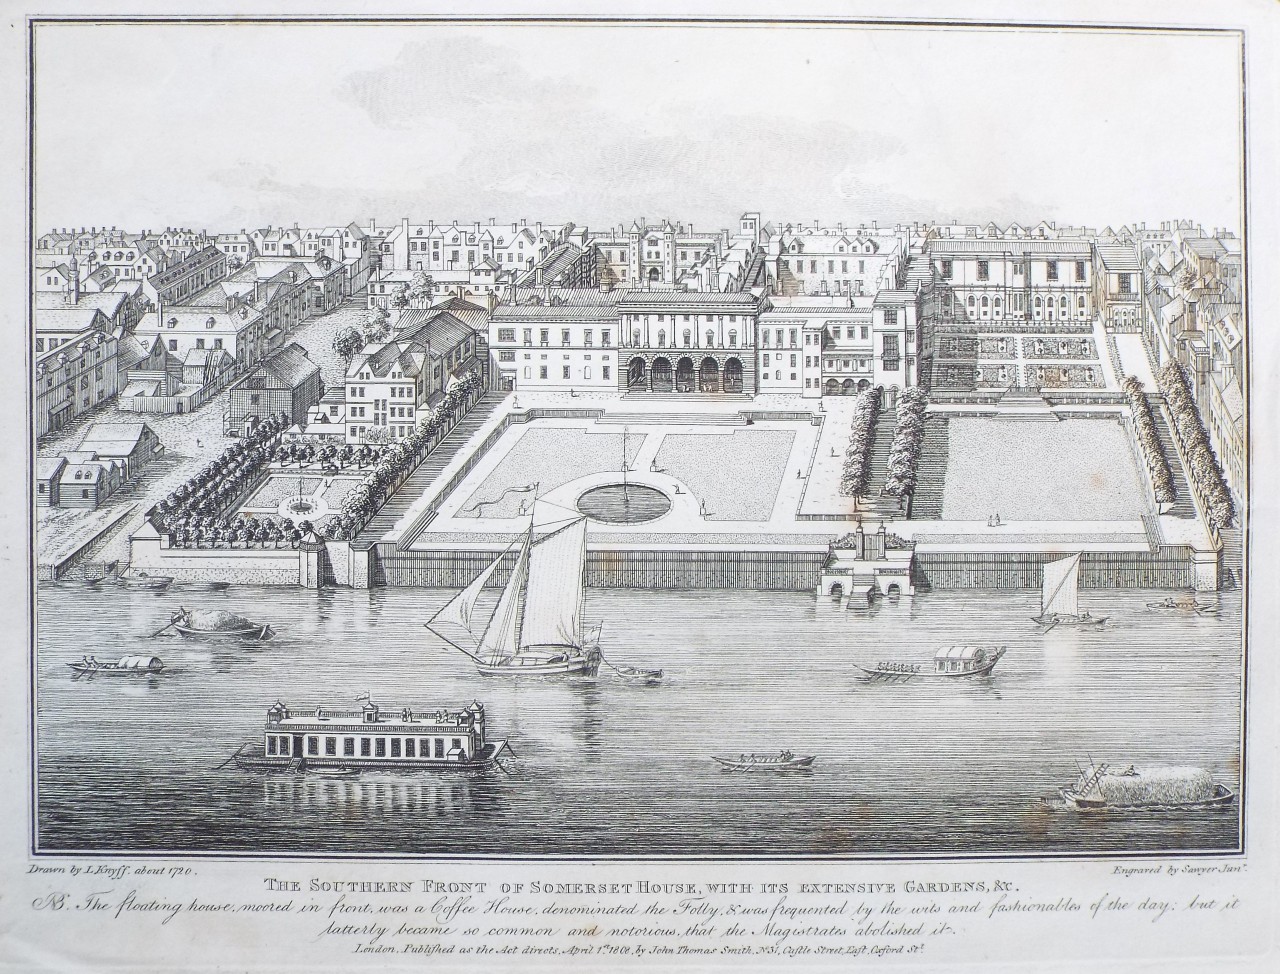 Print - The Southern Front of Somerset House, with its Extensive Gardens, &c. - 